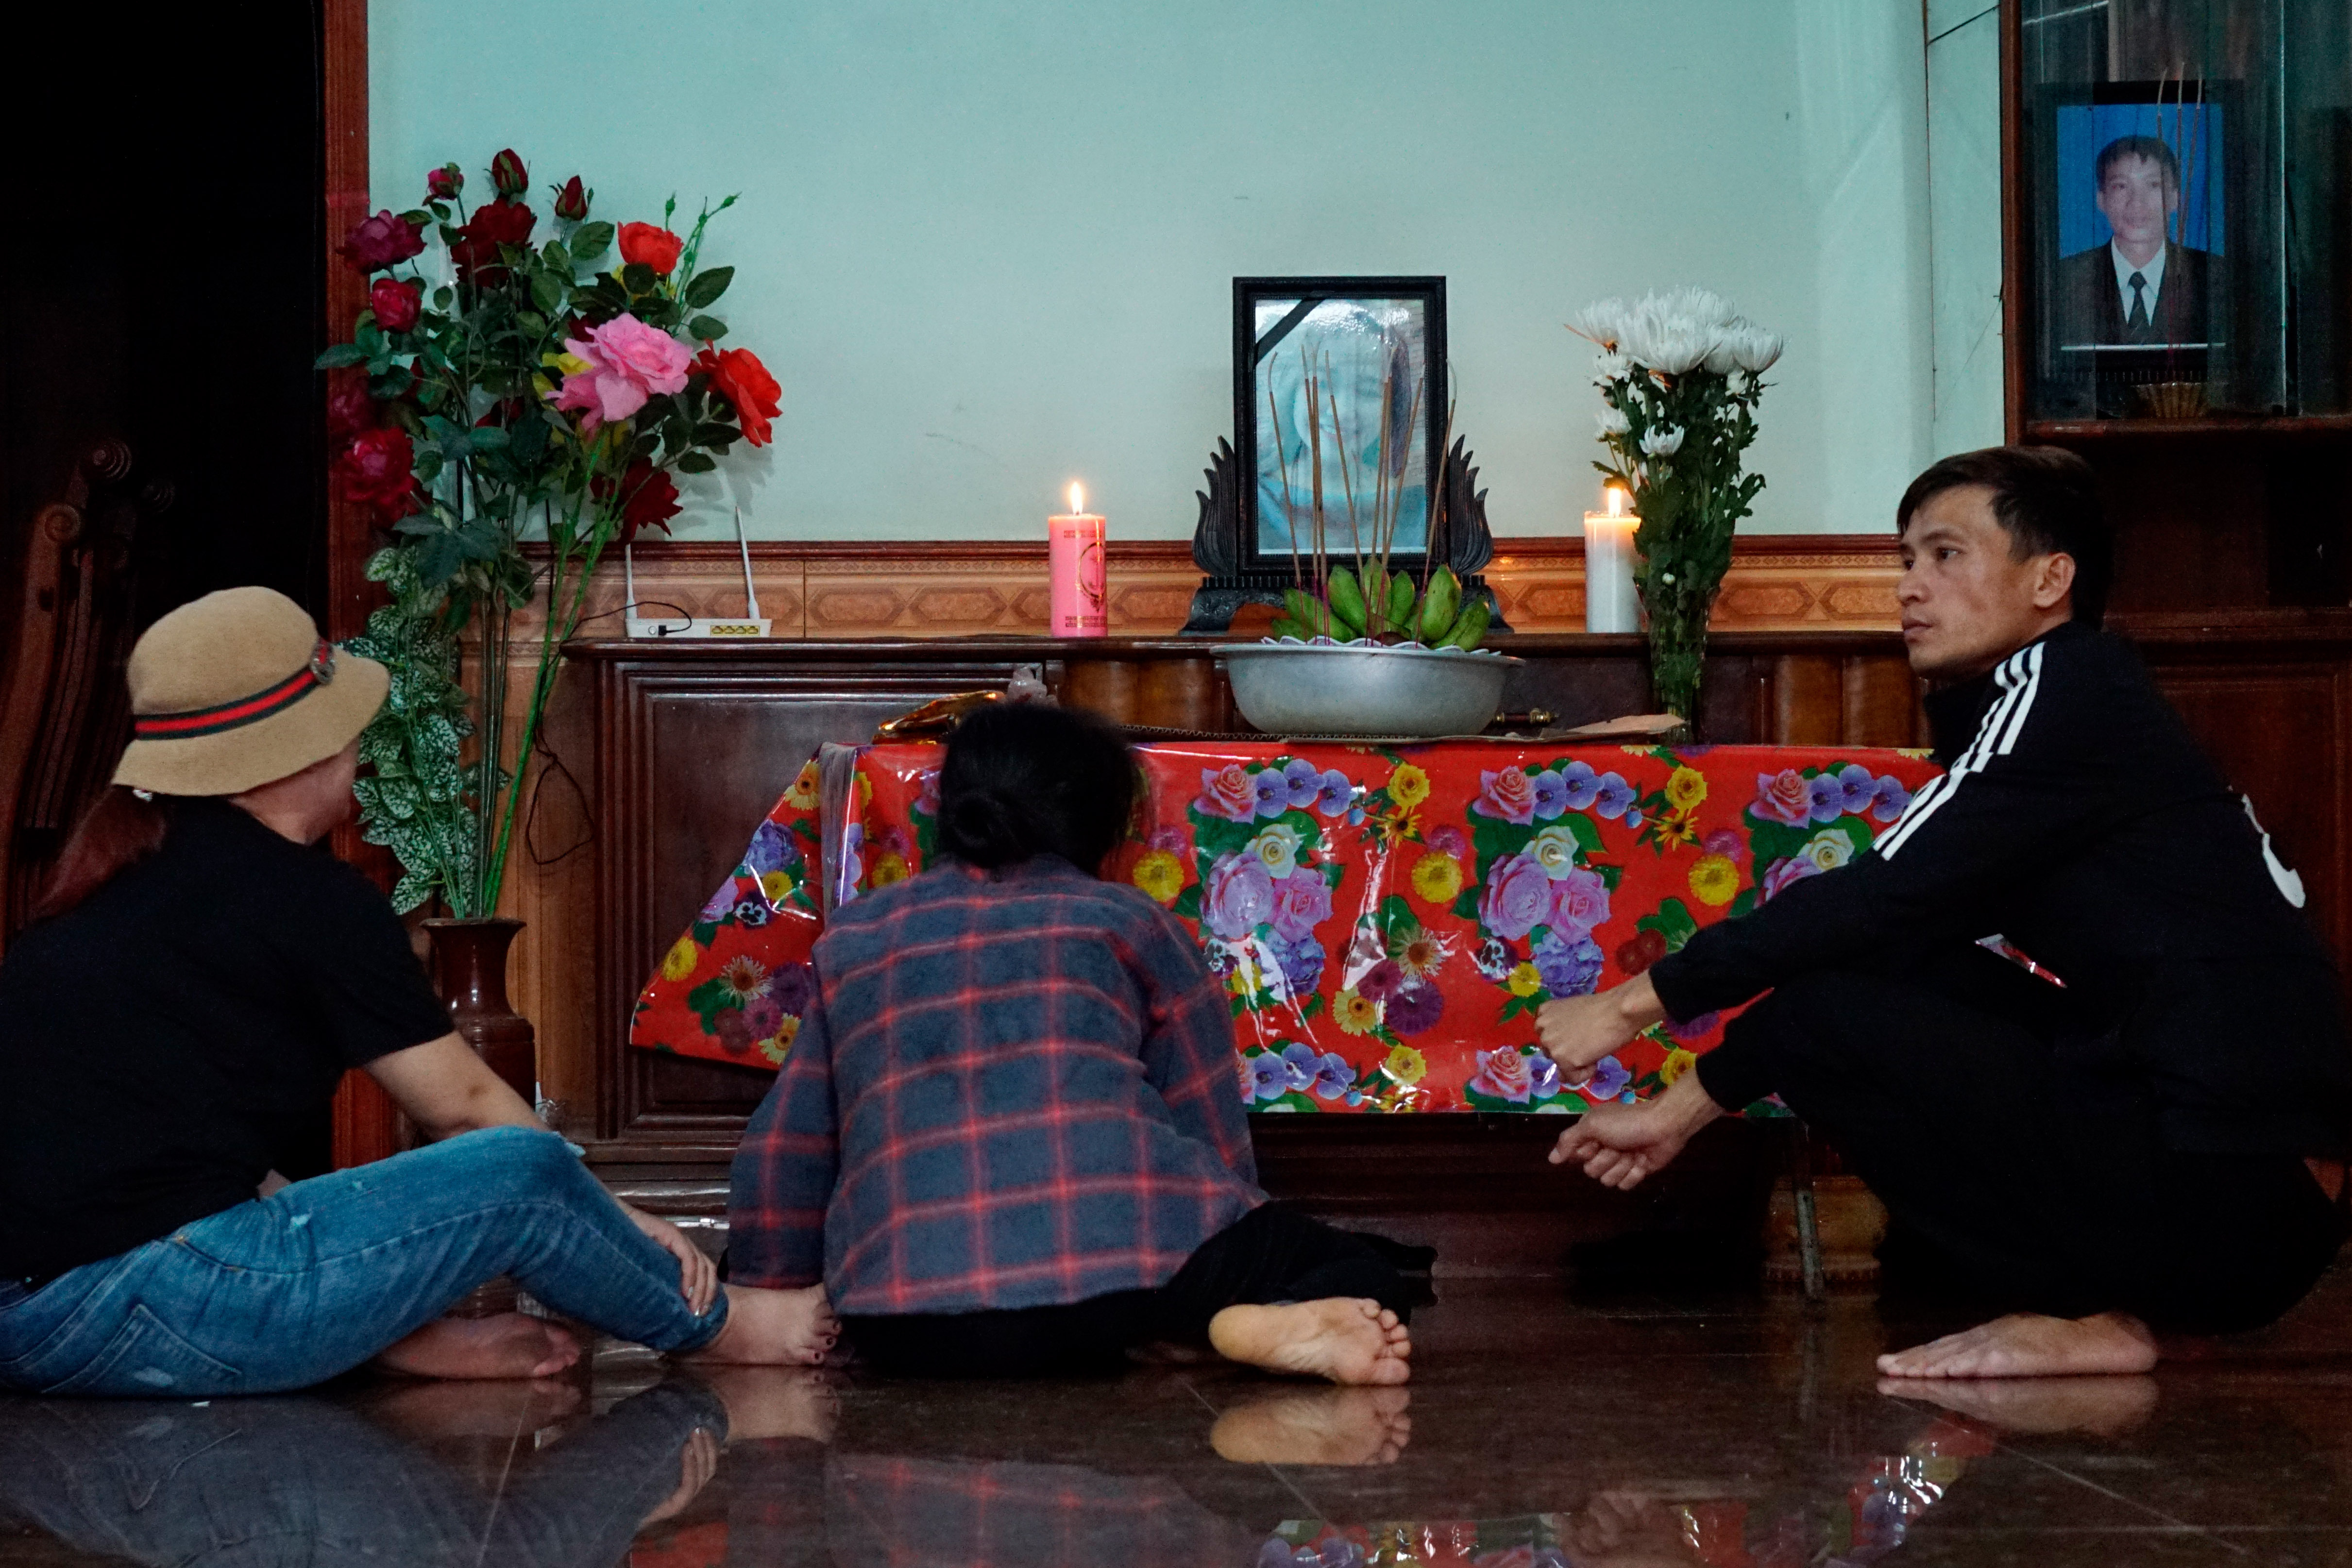 The mother, center, and other relatives of Bui Thi Nhung sit in front of an altar with Nhung's portrait inside her home Saturday, Oct. 26, 2019 in Do Thanh village, Nghe An province, Vietnam. Family members fear that Nhung could be among the dozens of people found dead in the back of a truck in England. (AP Photo/Linh Do)